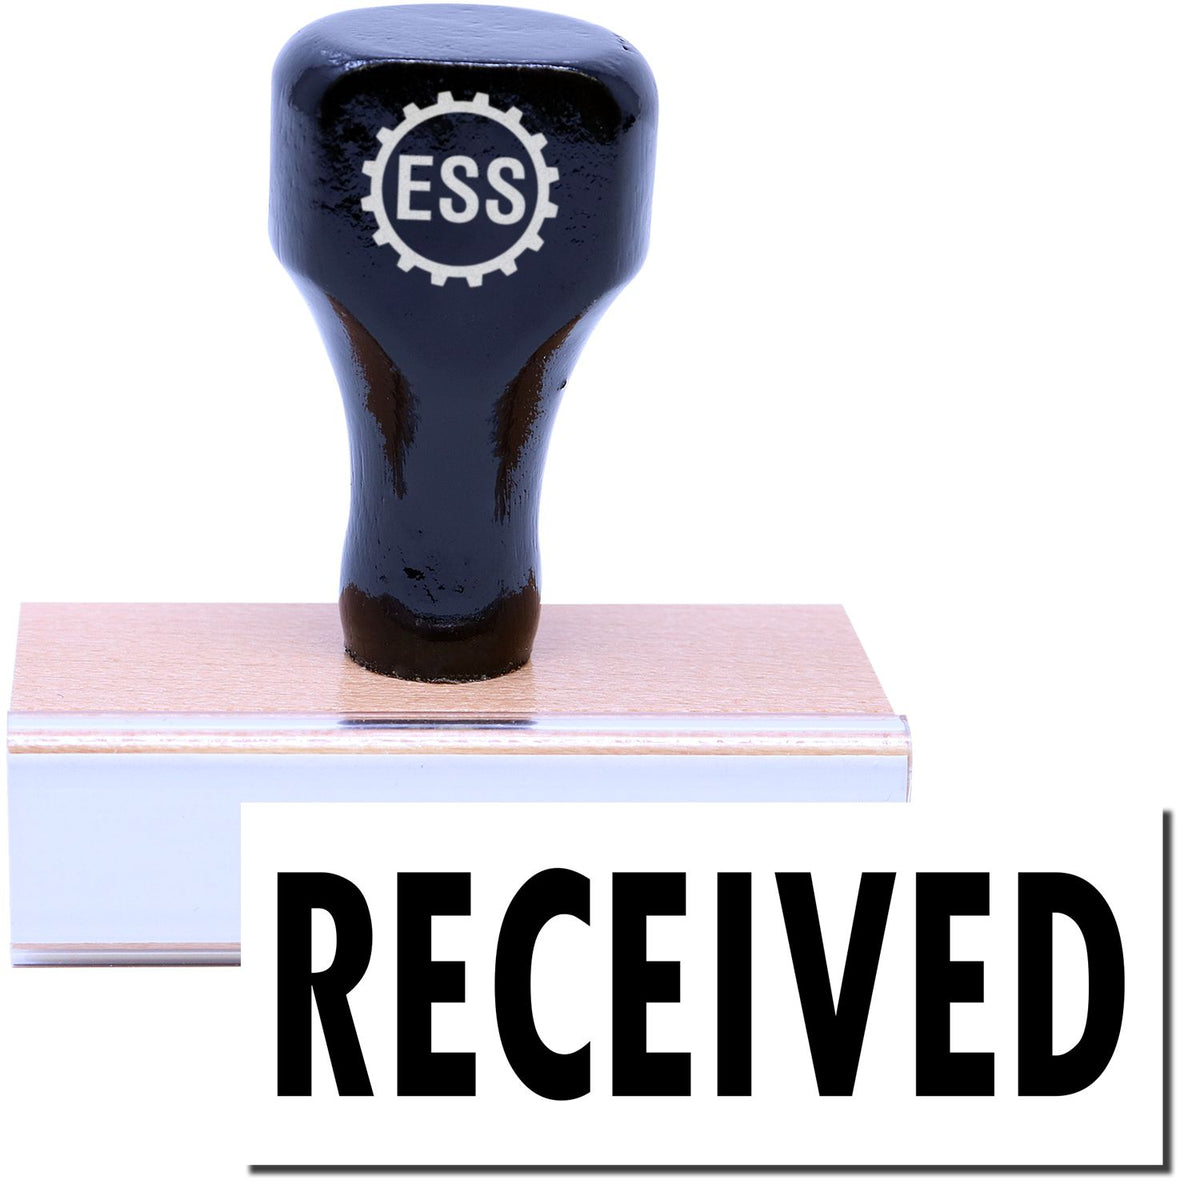 A stock office rubber stamp with a stamped image showing how the text &quot;RECEIVED&quot; in a large font is displayed after stamping.